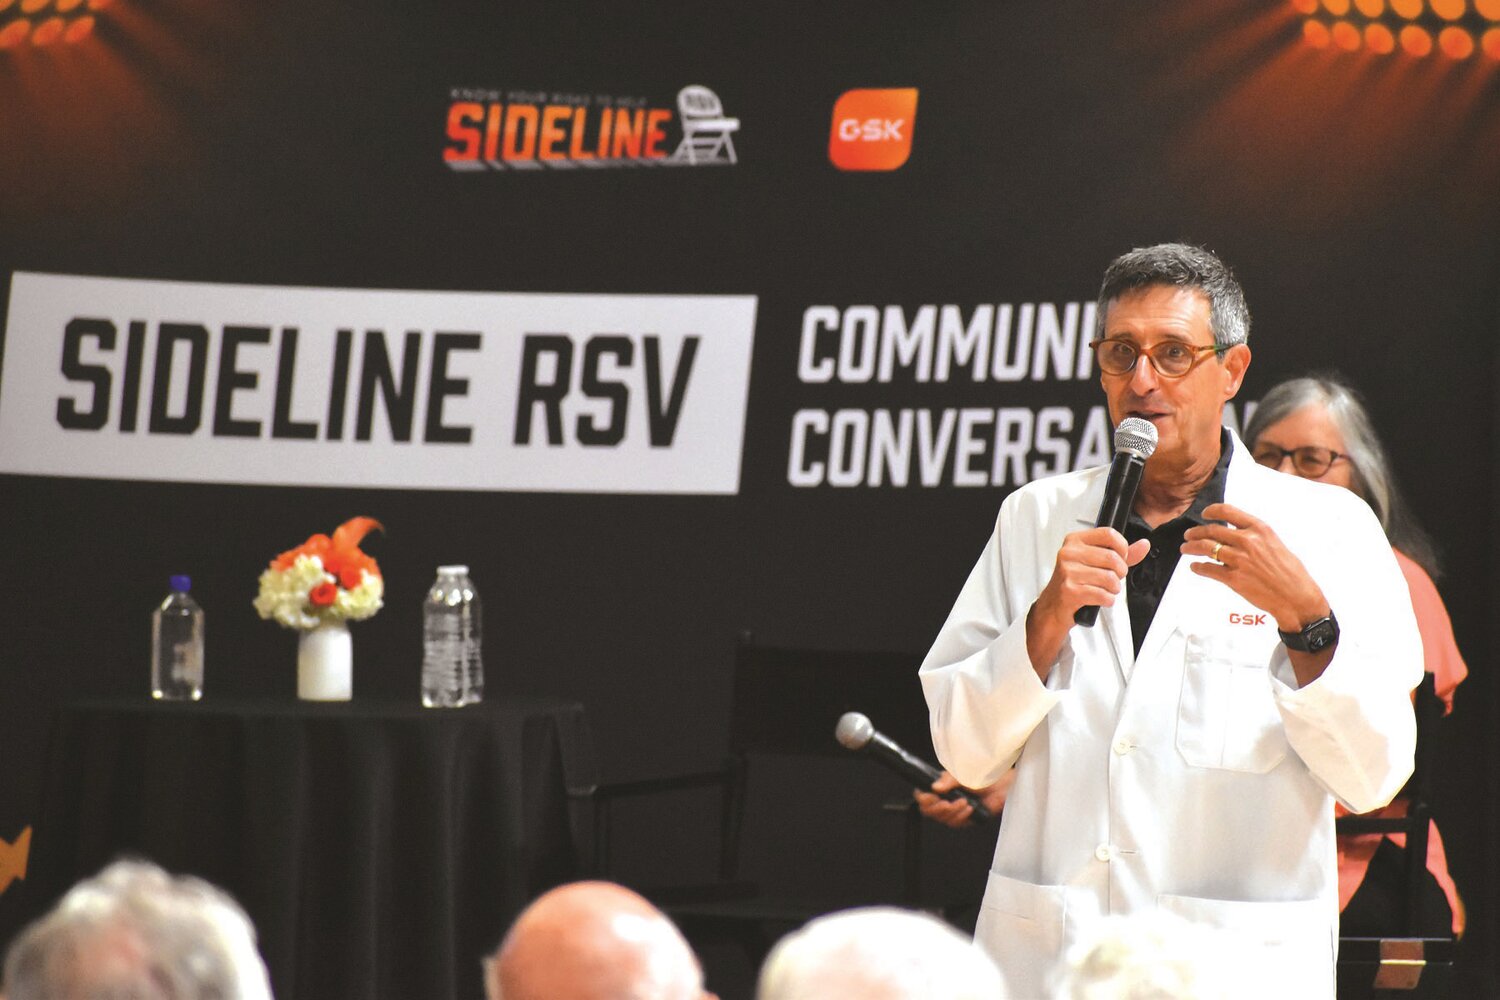 Dr. Leonard Friedland provides insight about RSV vaccinines and treatment at the “Sideline RSV” community conversation in Scottsdale. (Independent Newsmedia/George Zeliff)